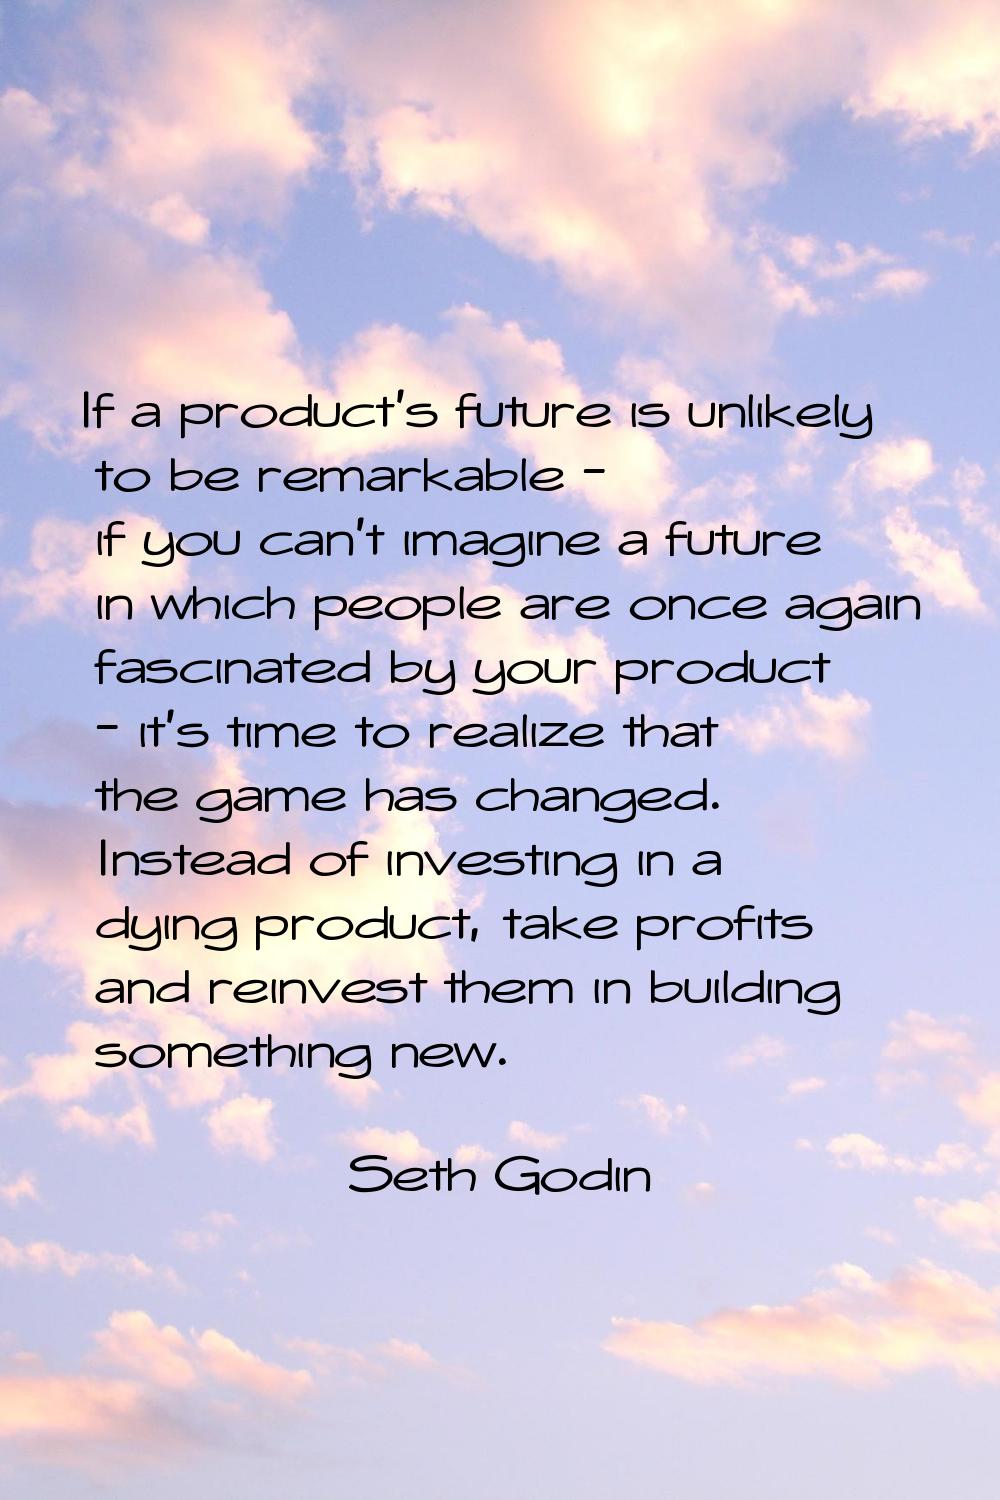 If a product's future is unlikely to be remarkable - if you can't imagine a future in which people 